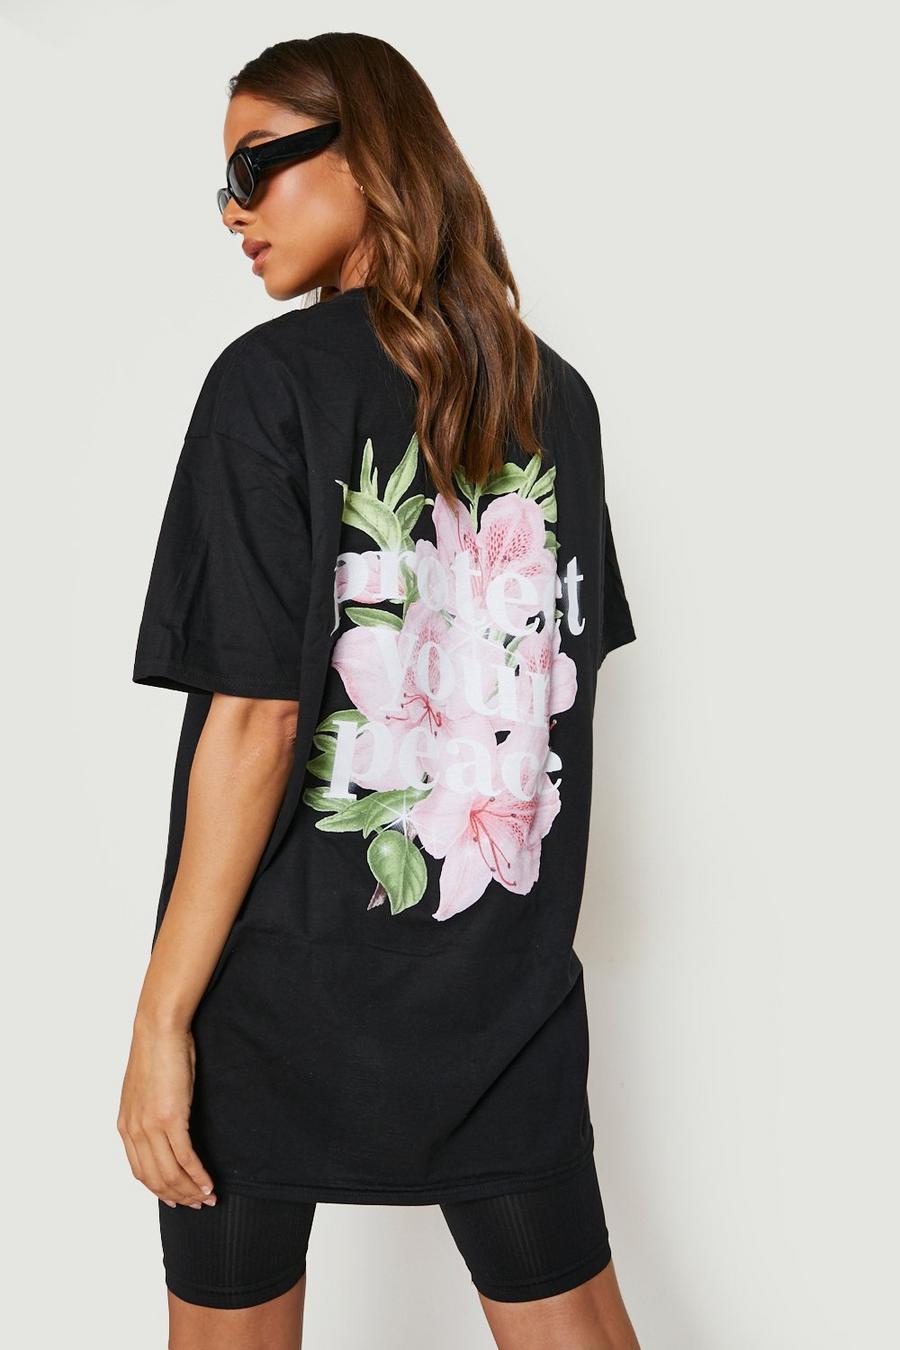 Hand-painted Short Oversized Floral T-shirt for Women. Bright 